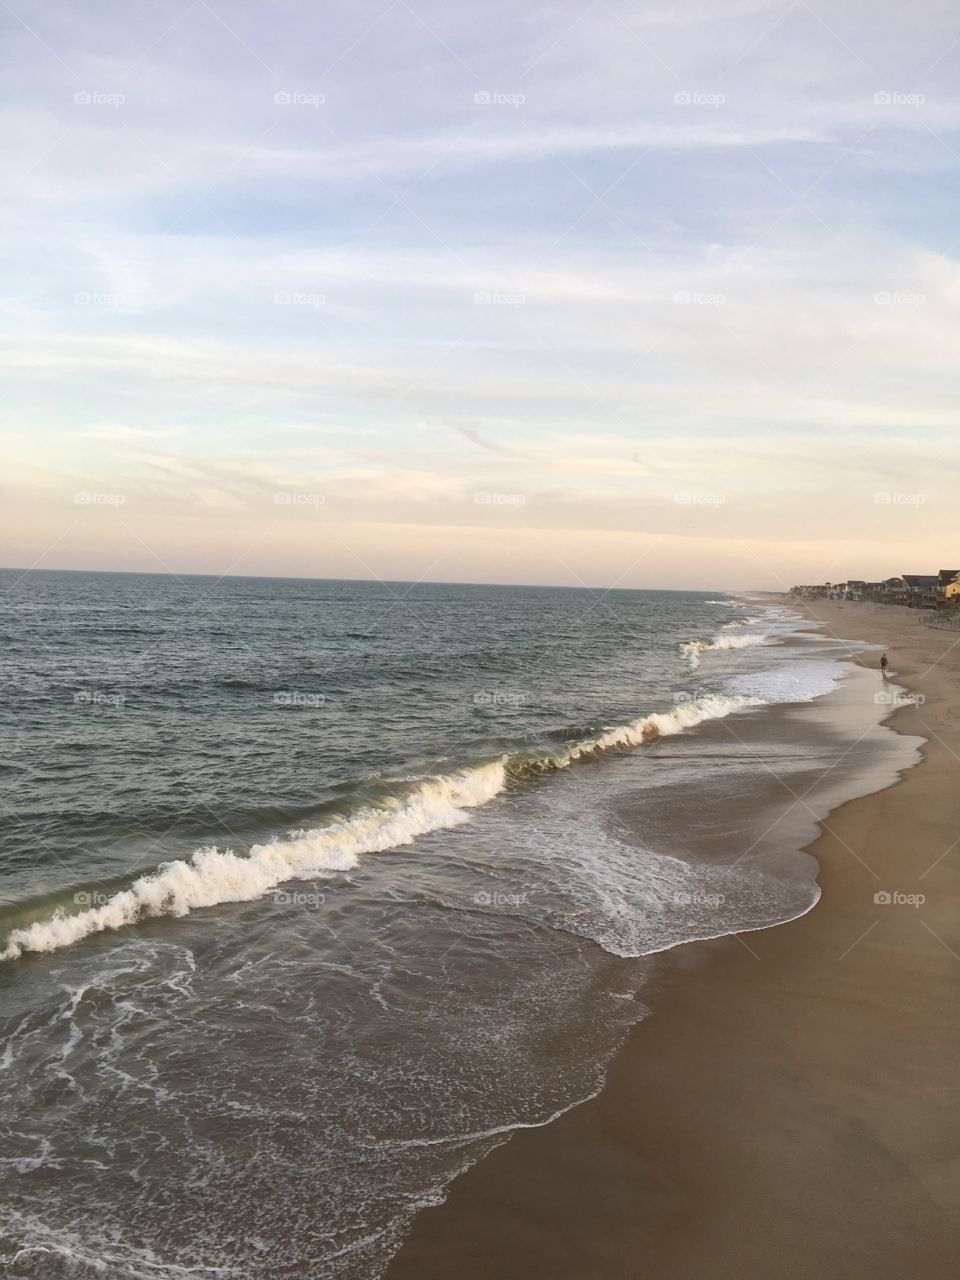 Early evening view from fishing pier Outer Banks, NC